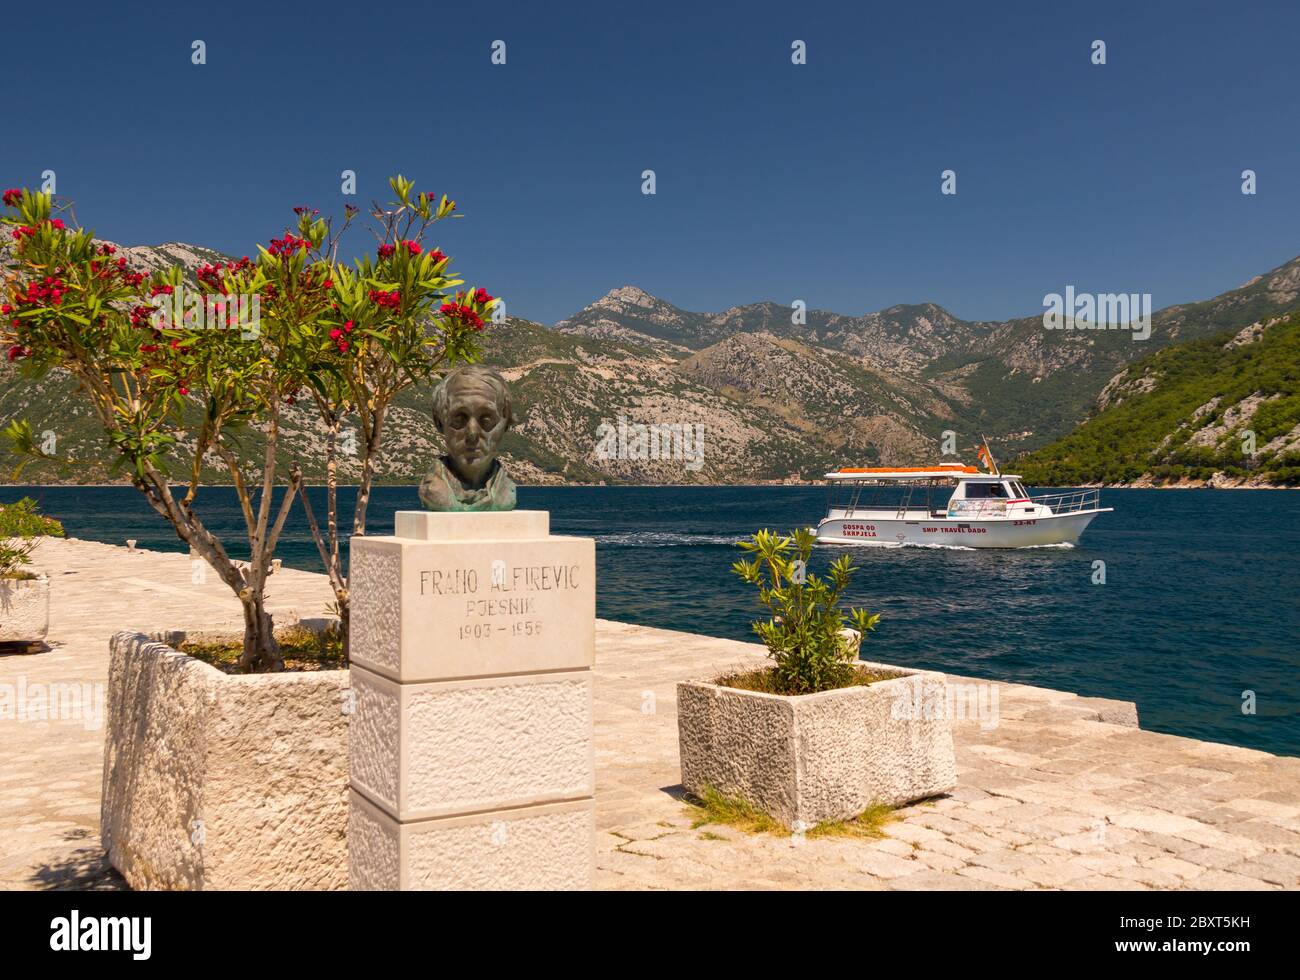 Frano Alfirevic bust, Our Lady of the rocks, Perast, Montenegro Stock Photo